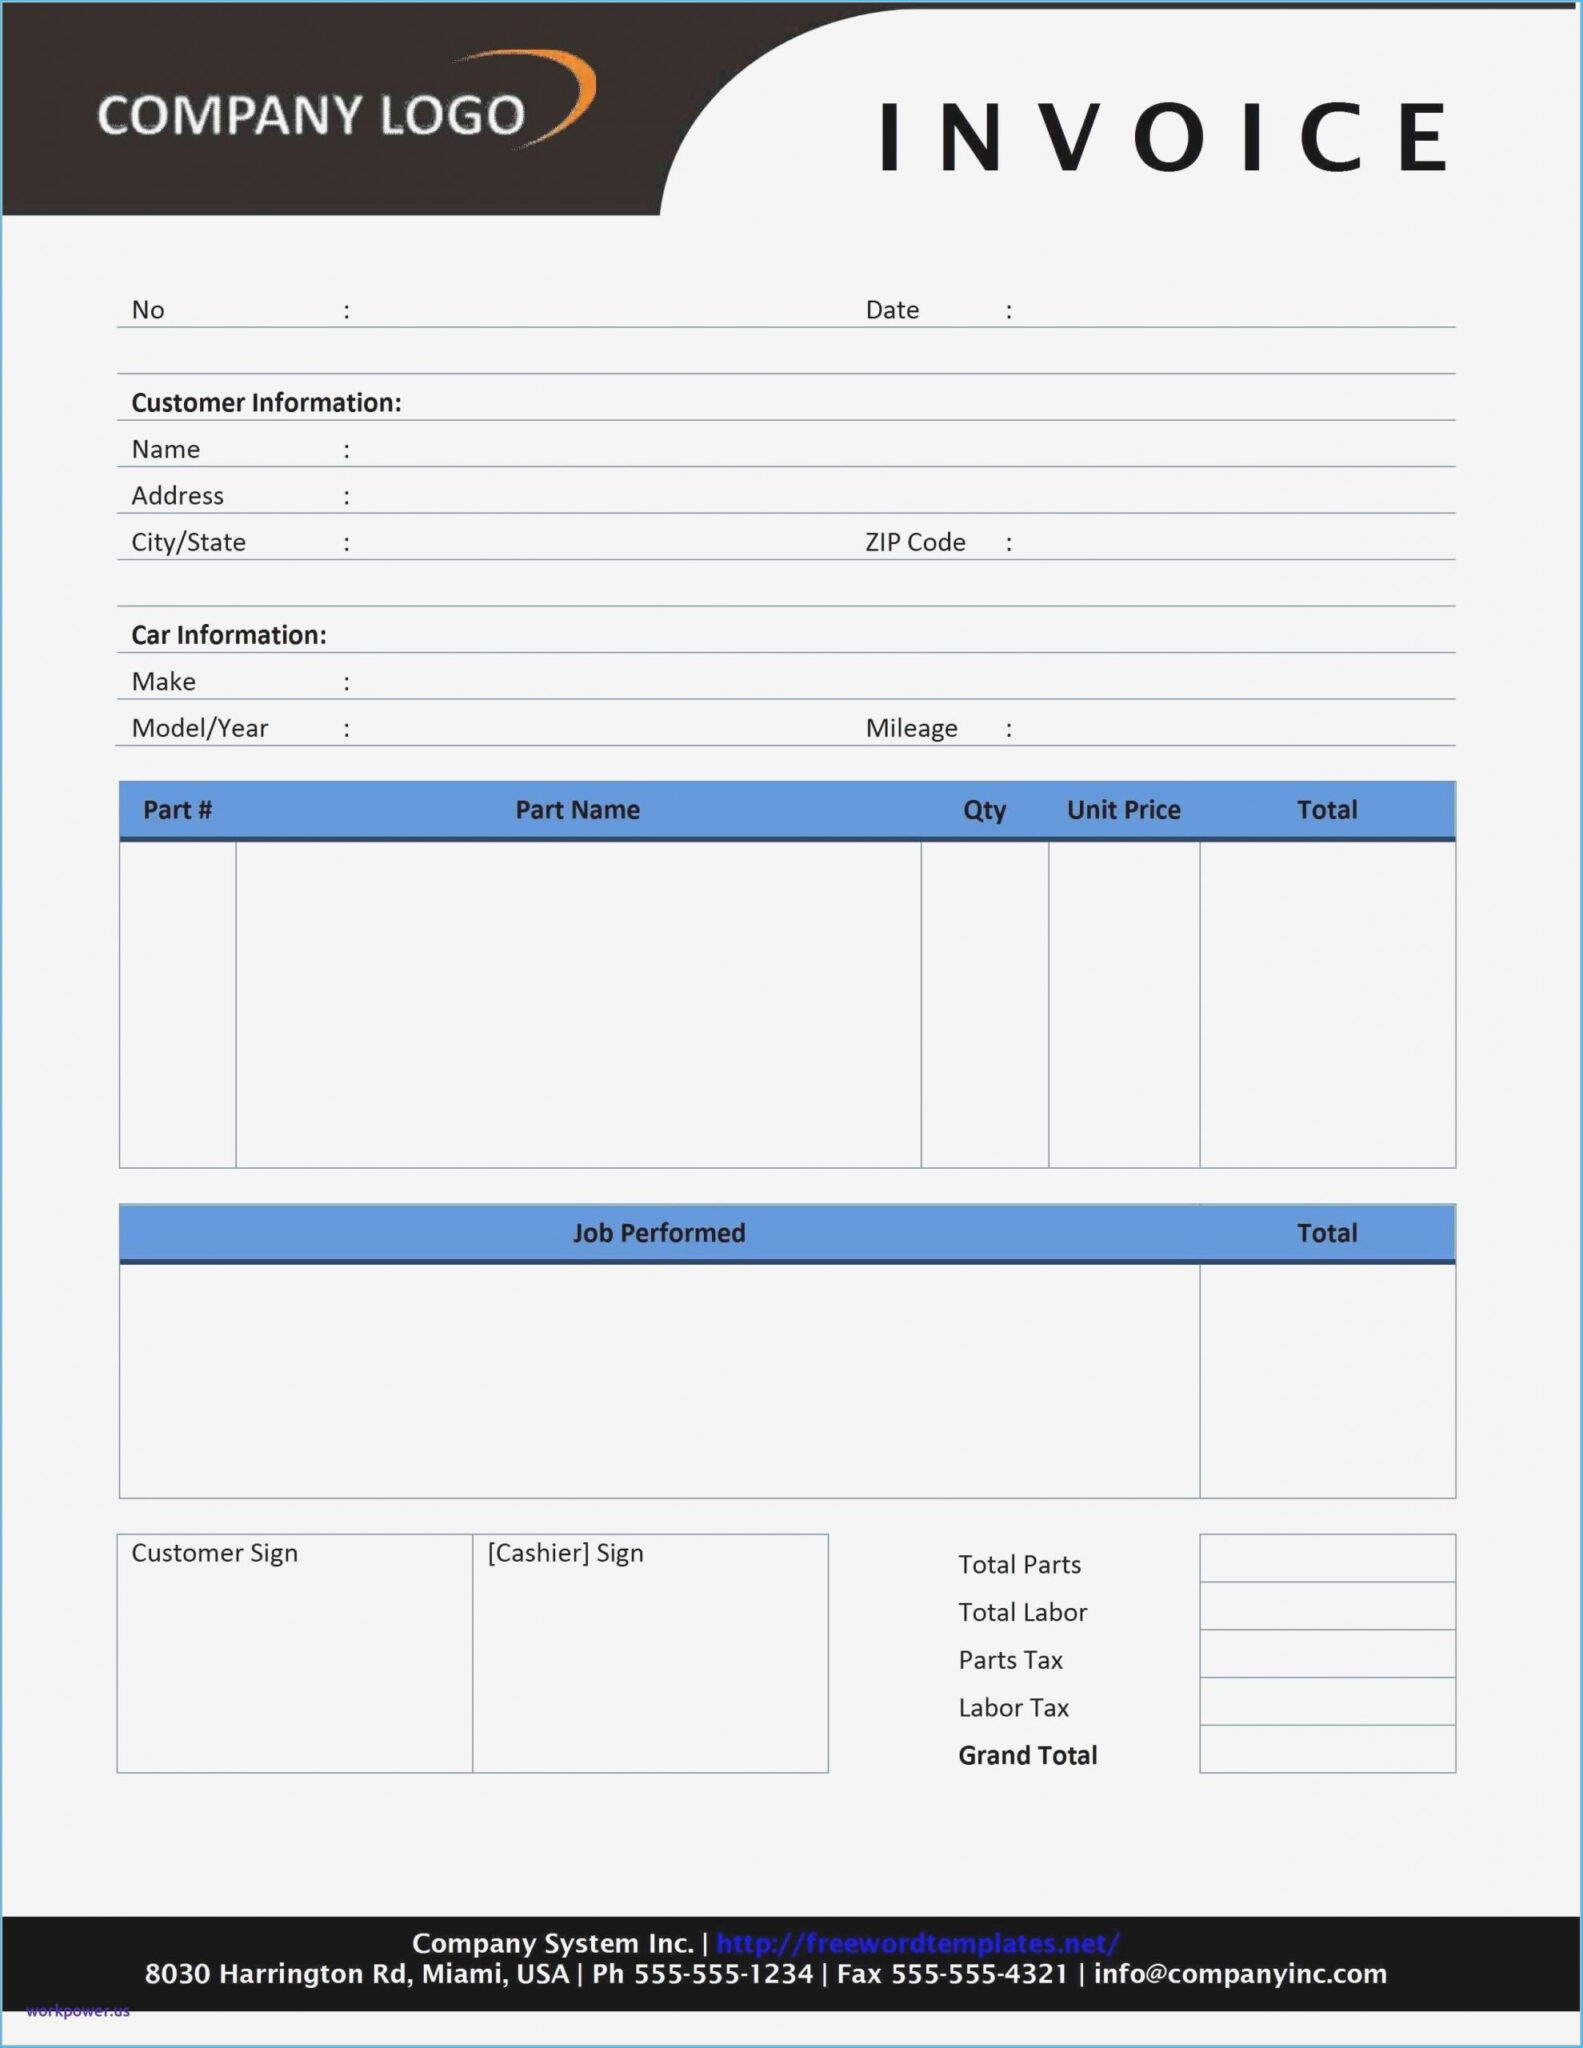 libre-calc-invoice-mplate-for-libreoffice-free-examples-with